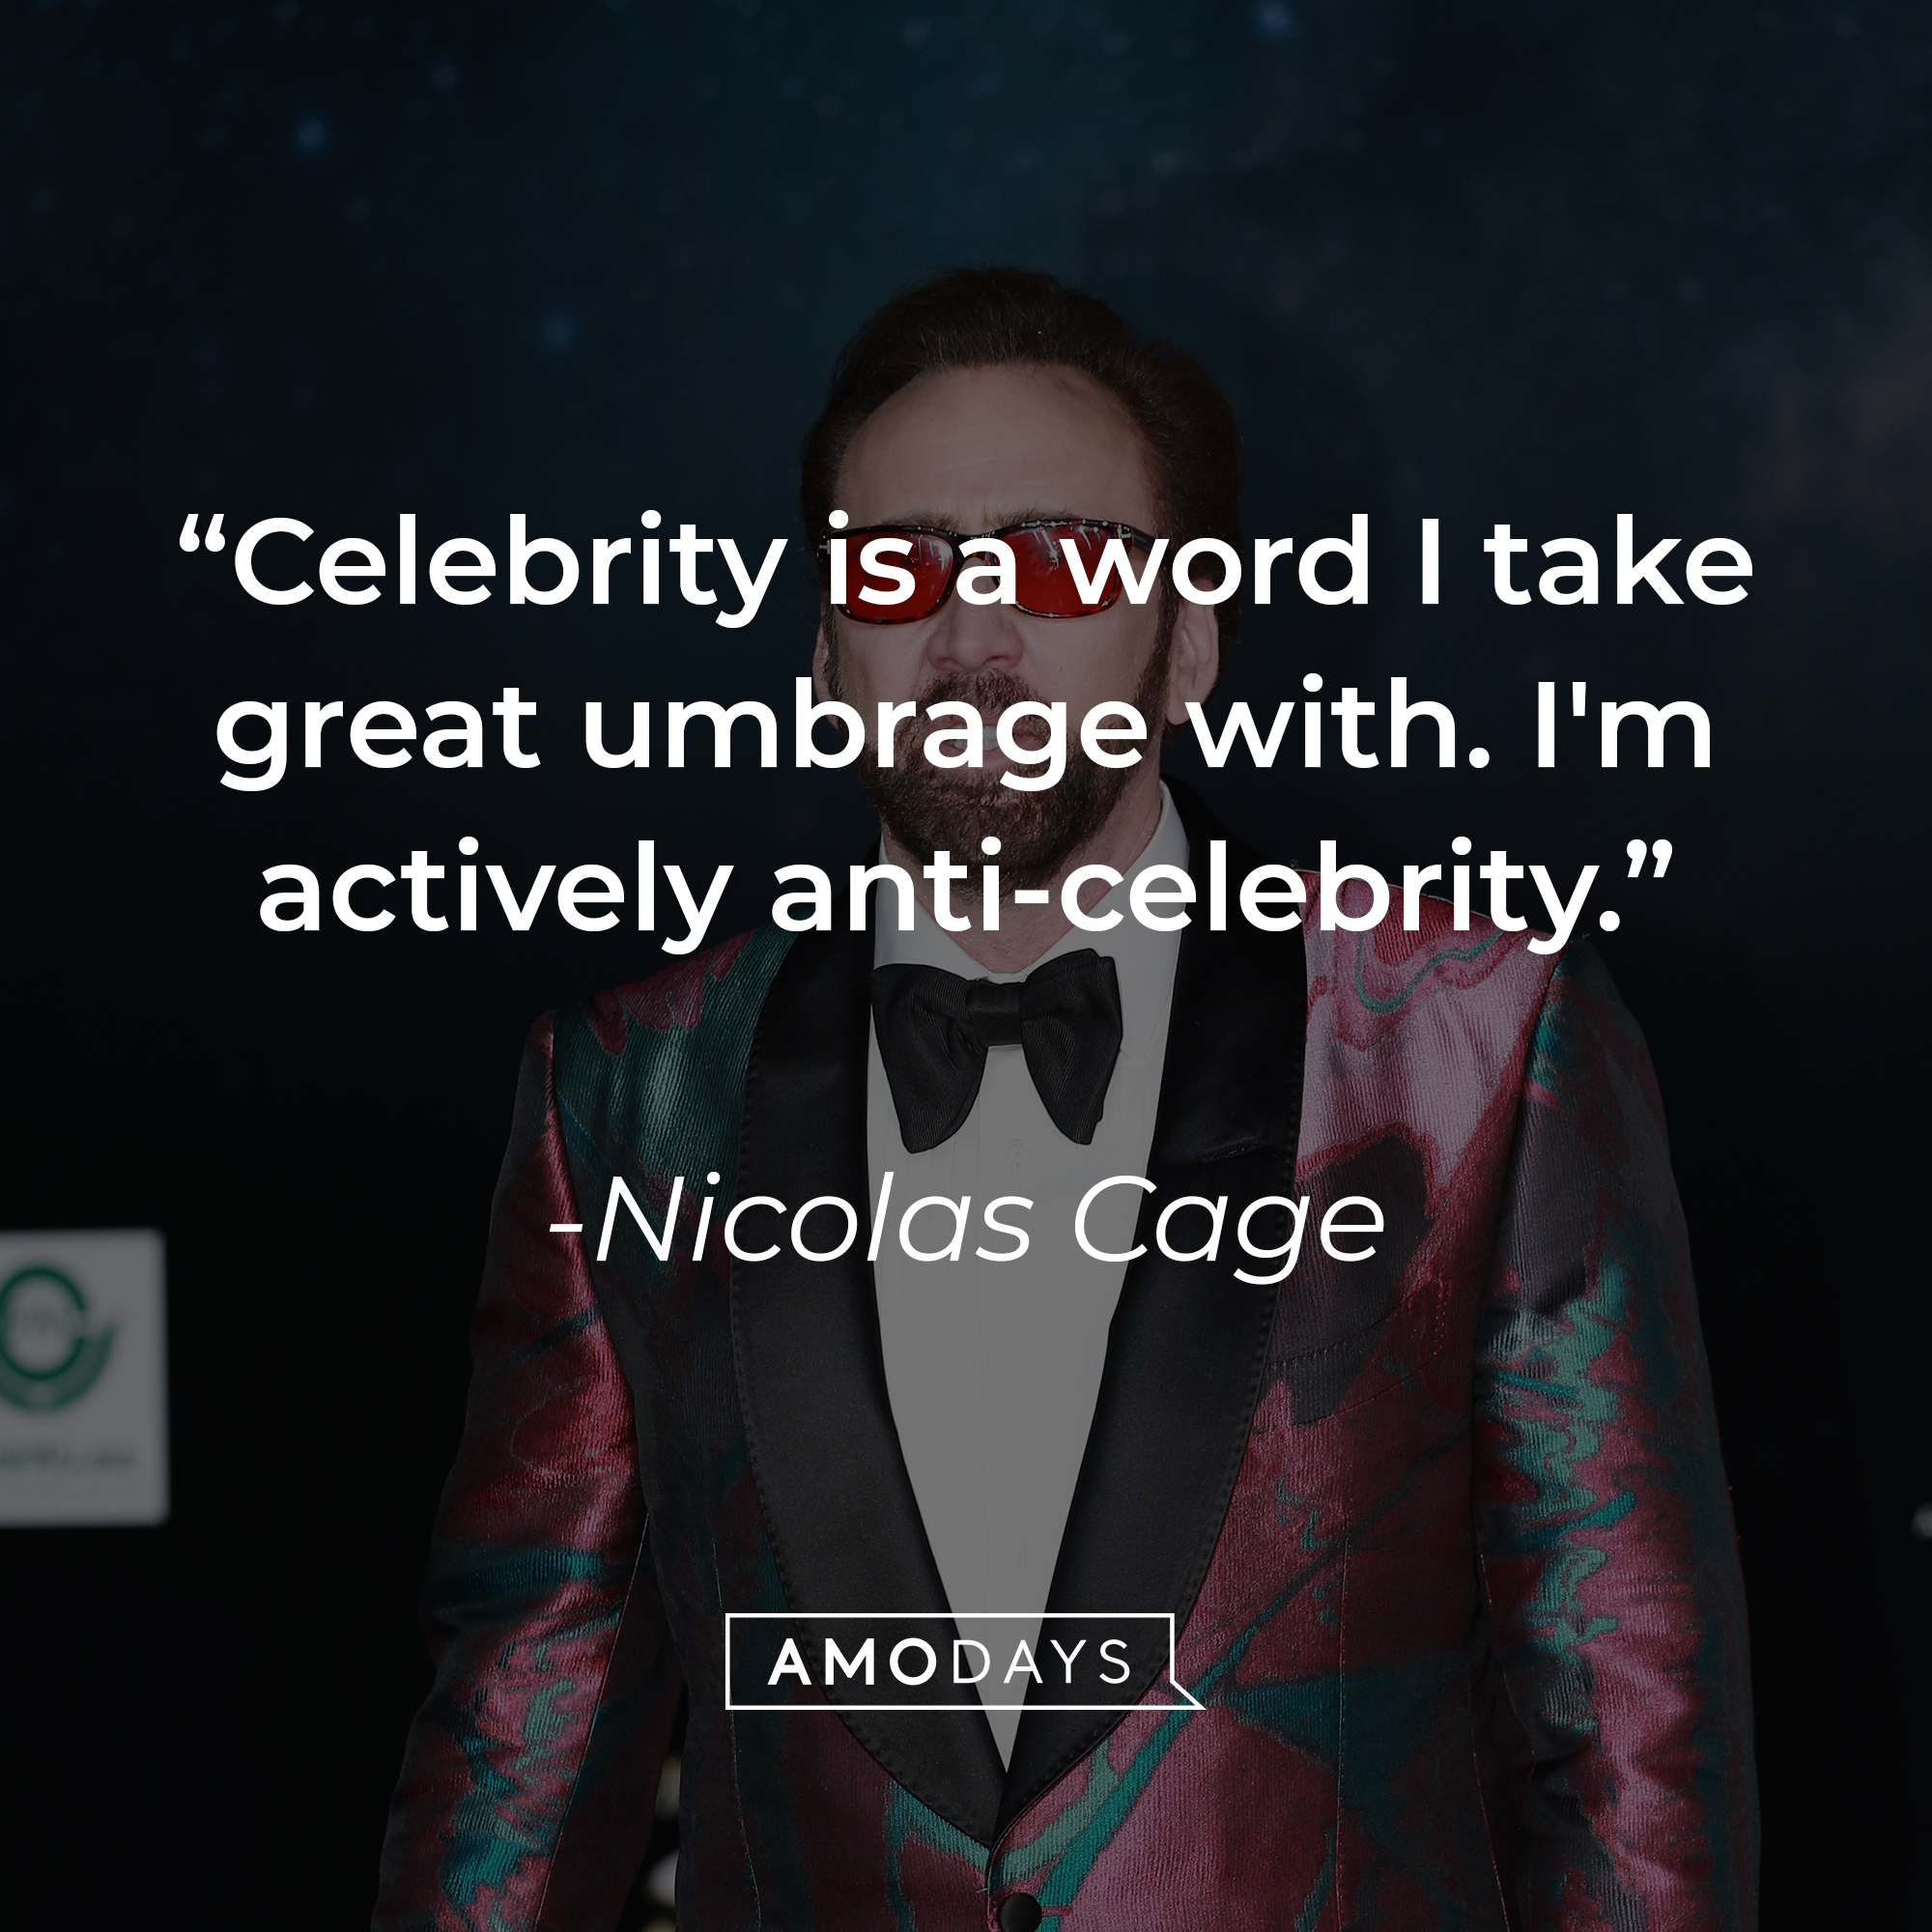 Nicolas Cage's quote: "Celebrity is a word I take great umbrage with. I'm actively anti-celebrity." | Source: Getty Images